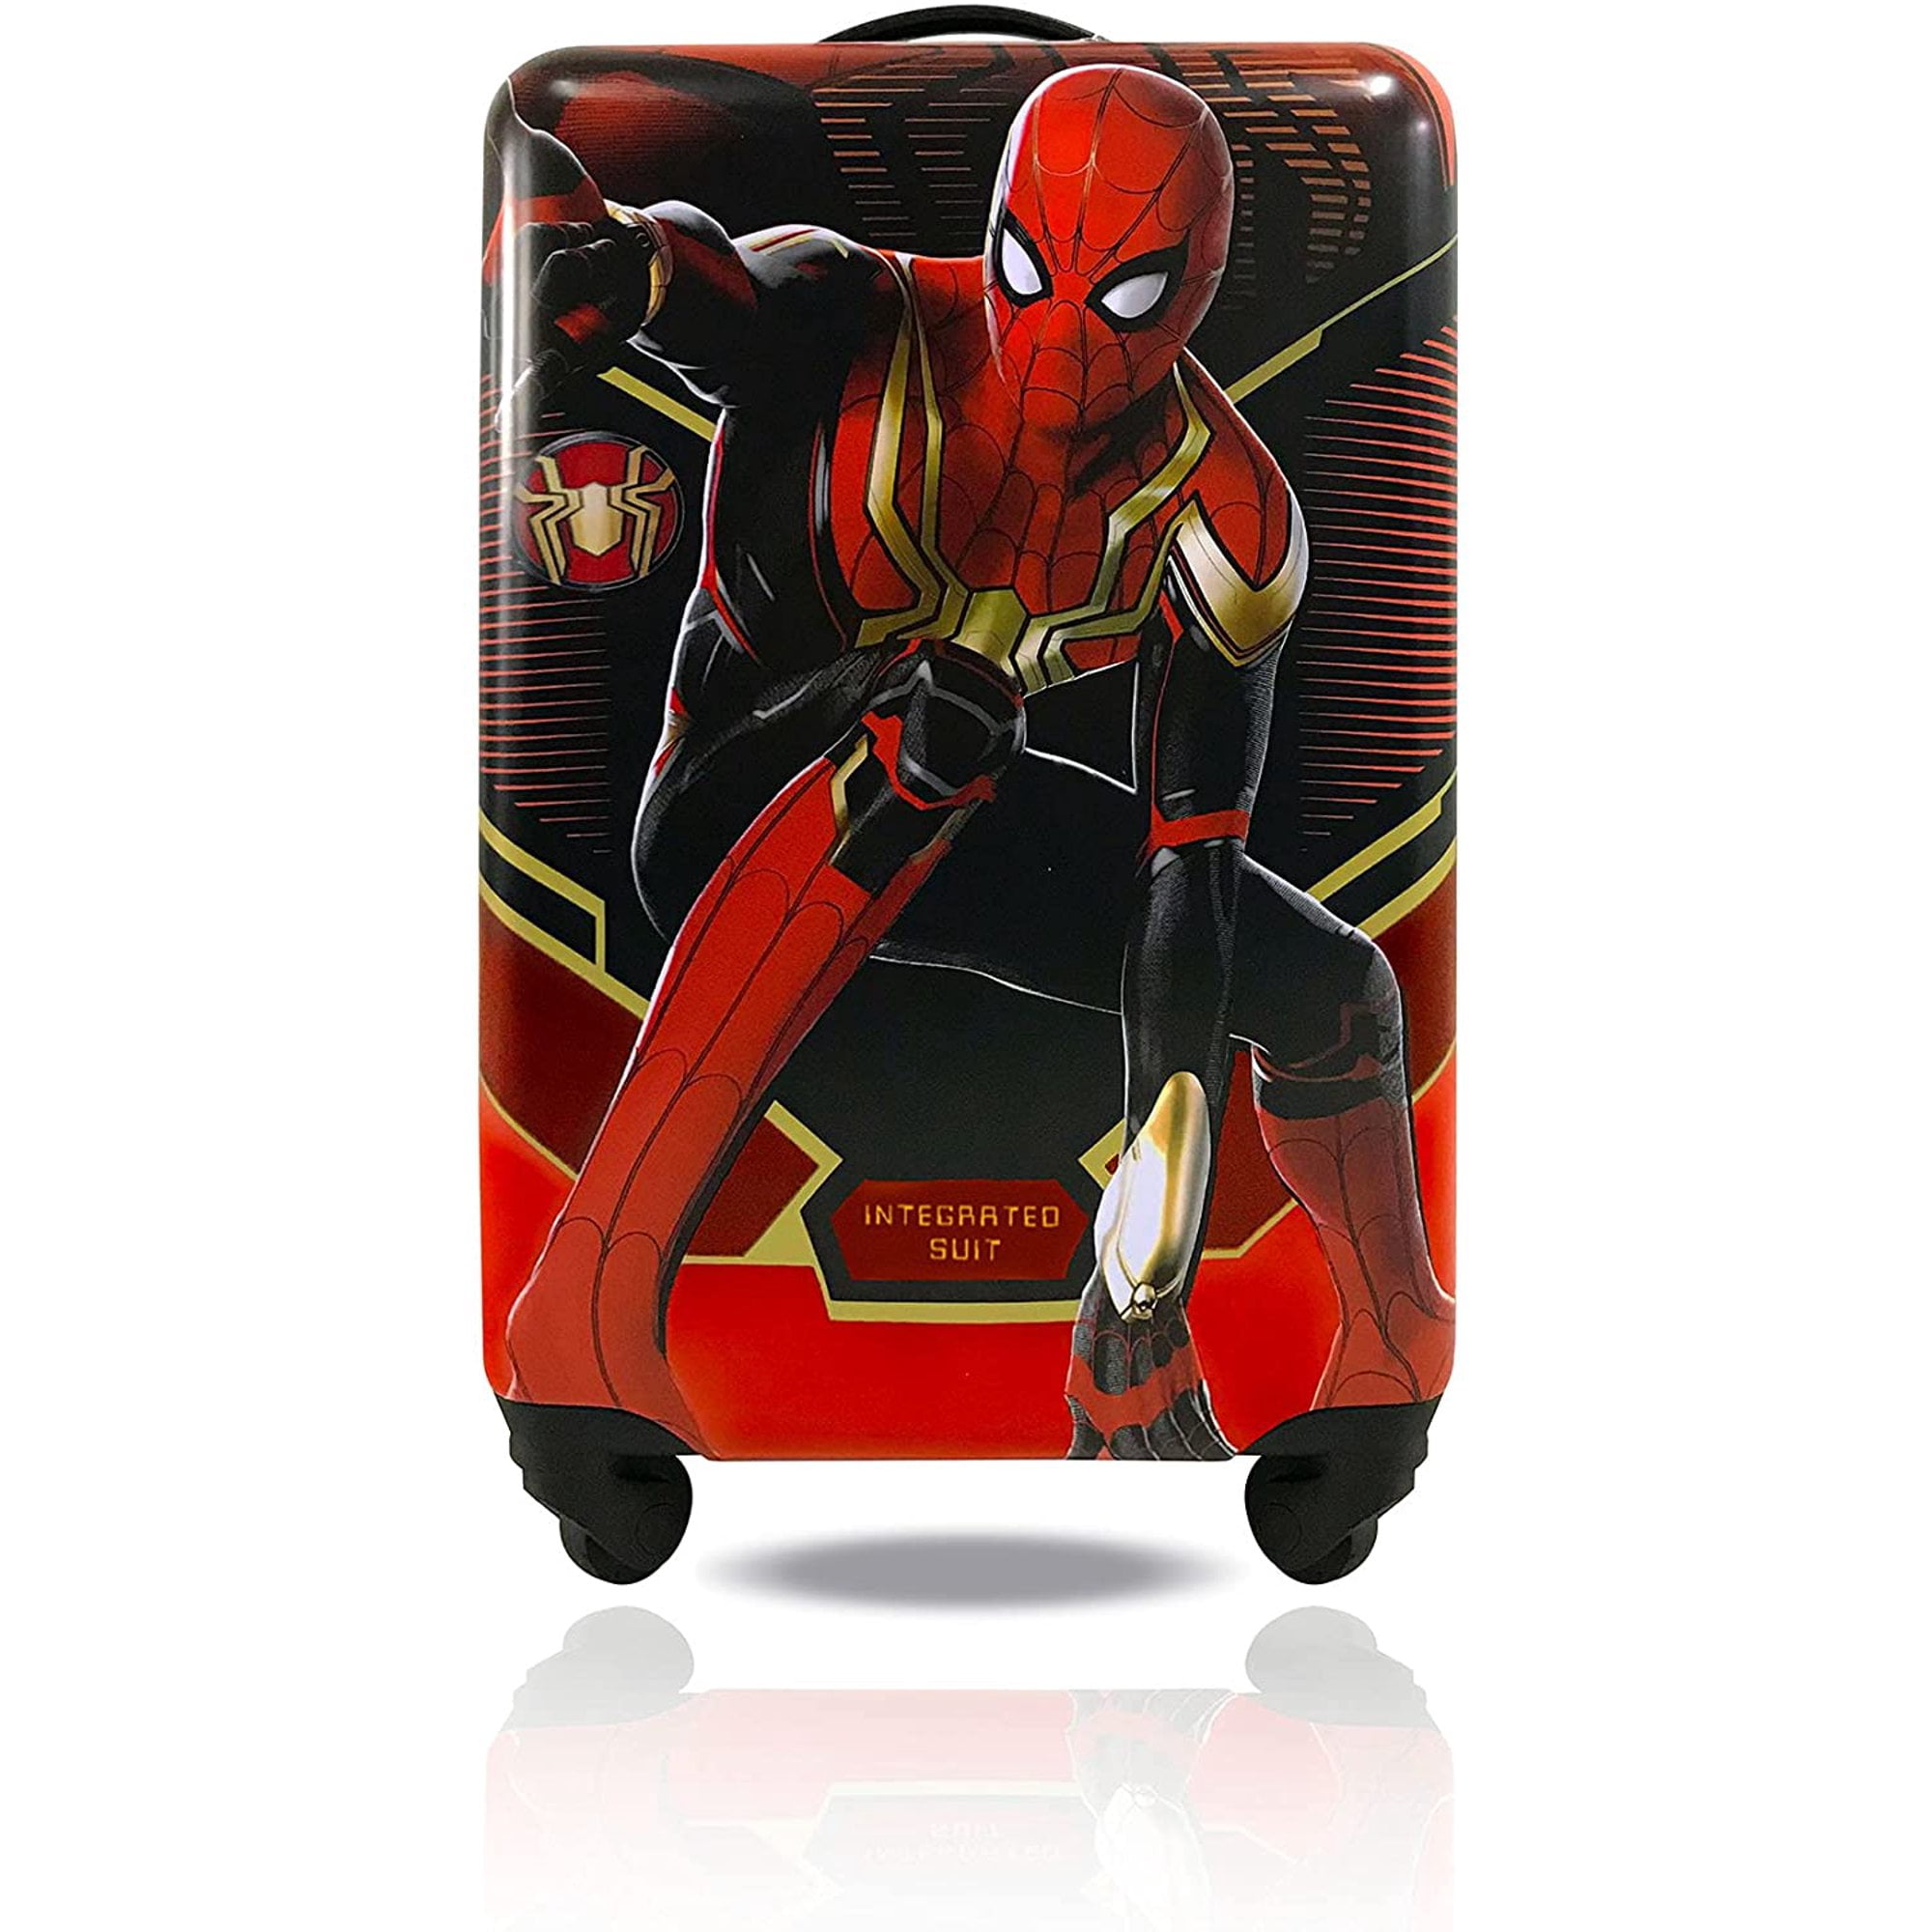 Travel Inches Kids Carry-On Home Hard-Sided Luggage No Way 20 for Suitcase Tween Spinner Trolley Rolling Spiderman